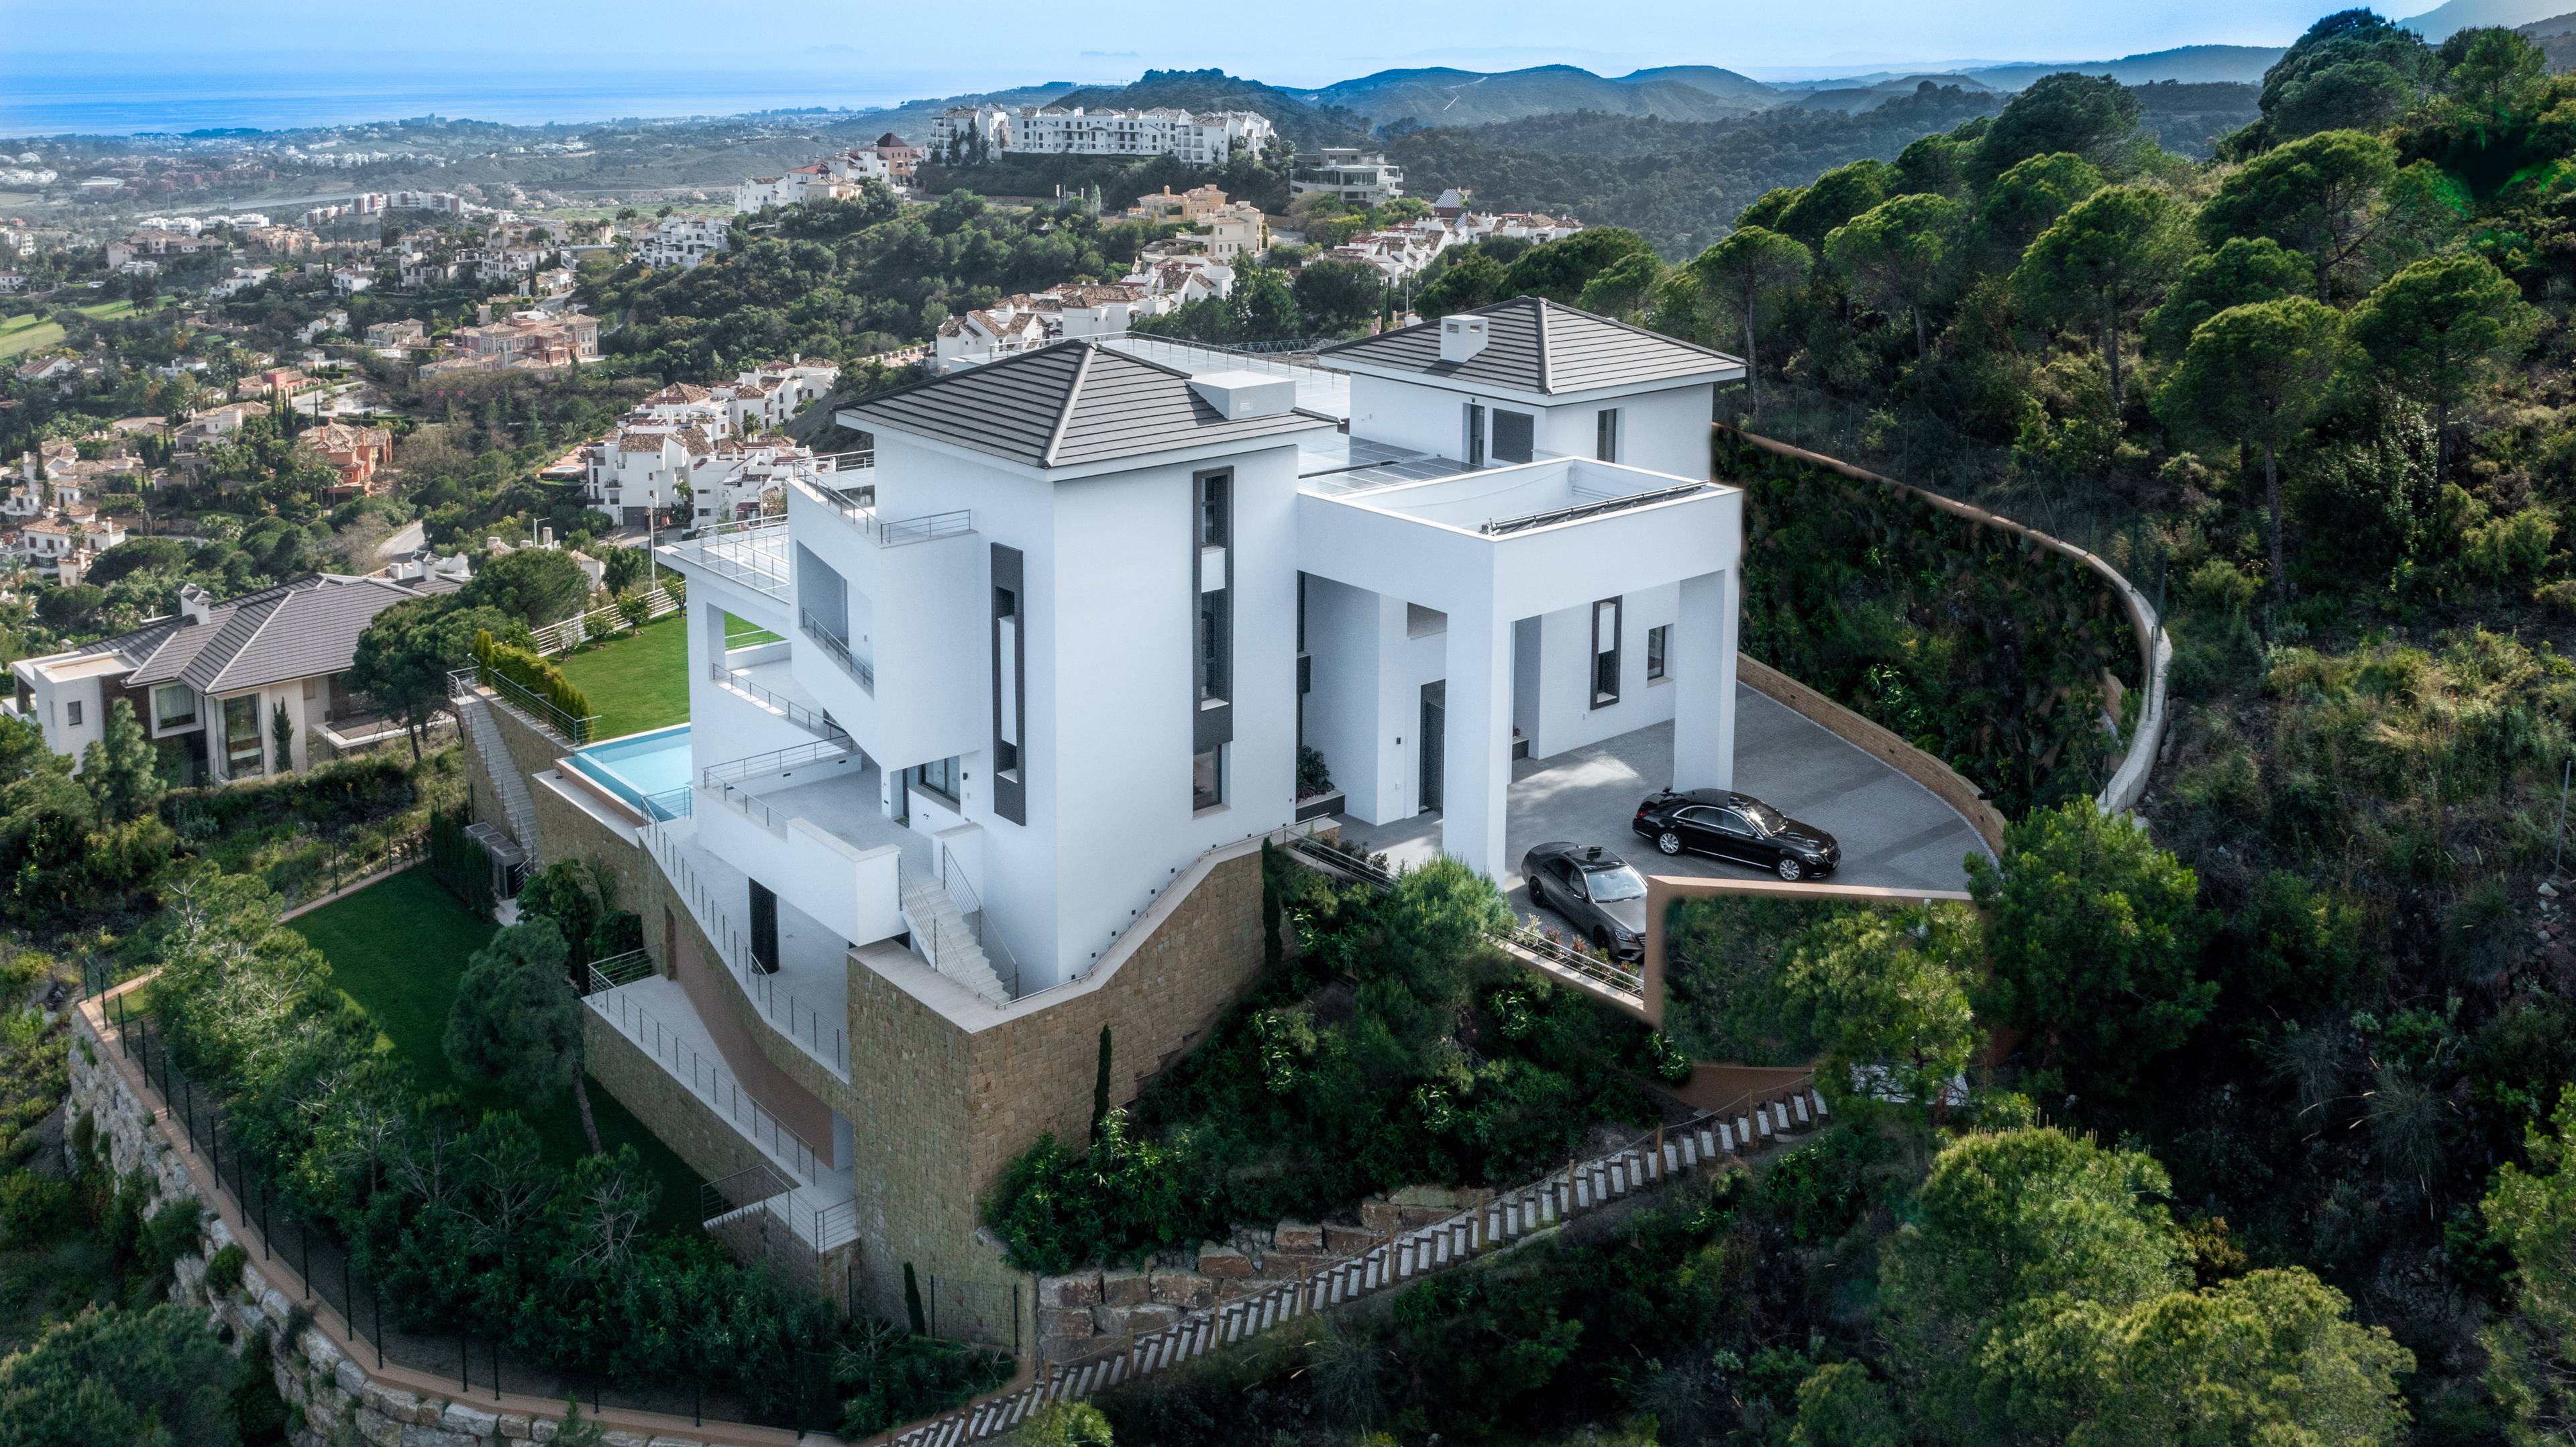 Newly built state-of-the-art villa with panoramic coastal views